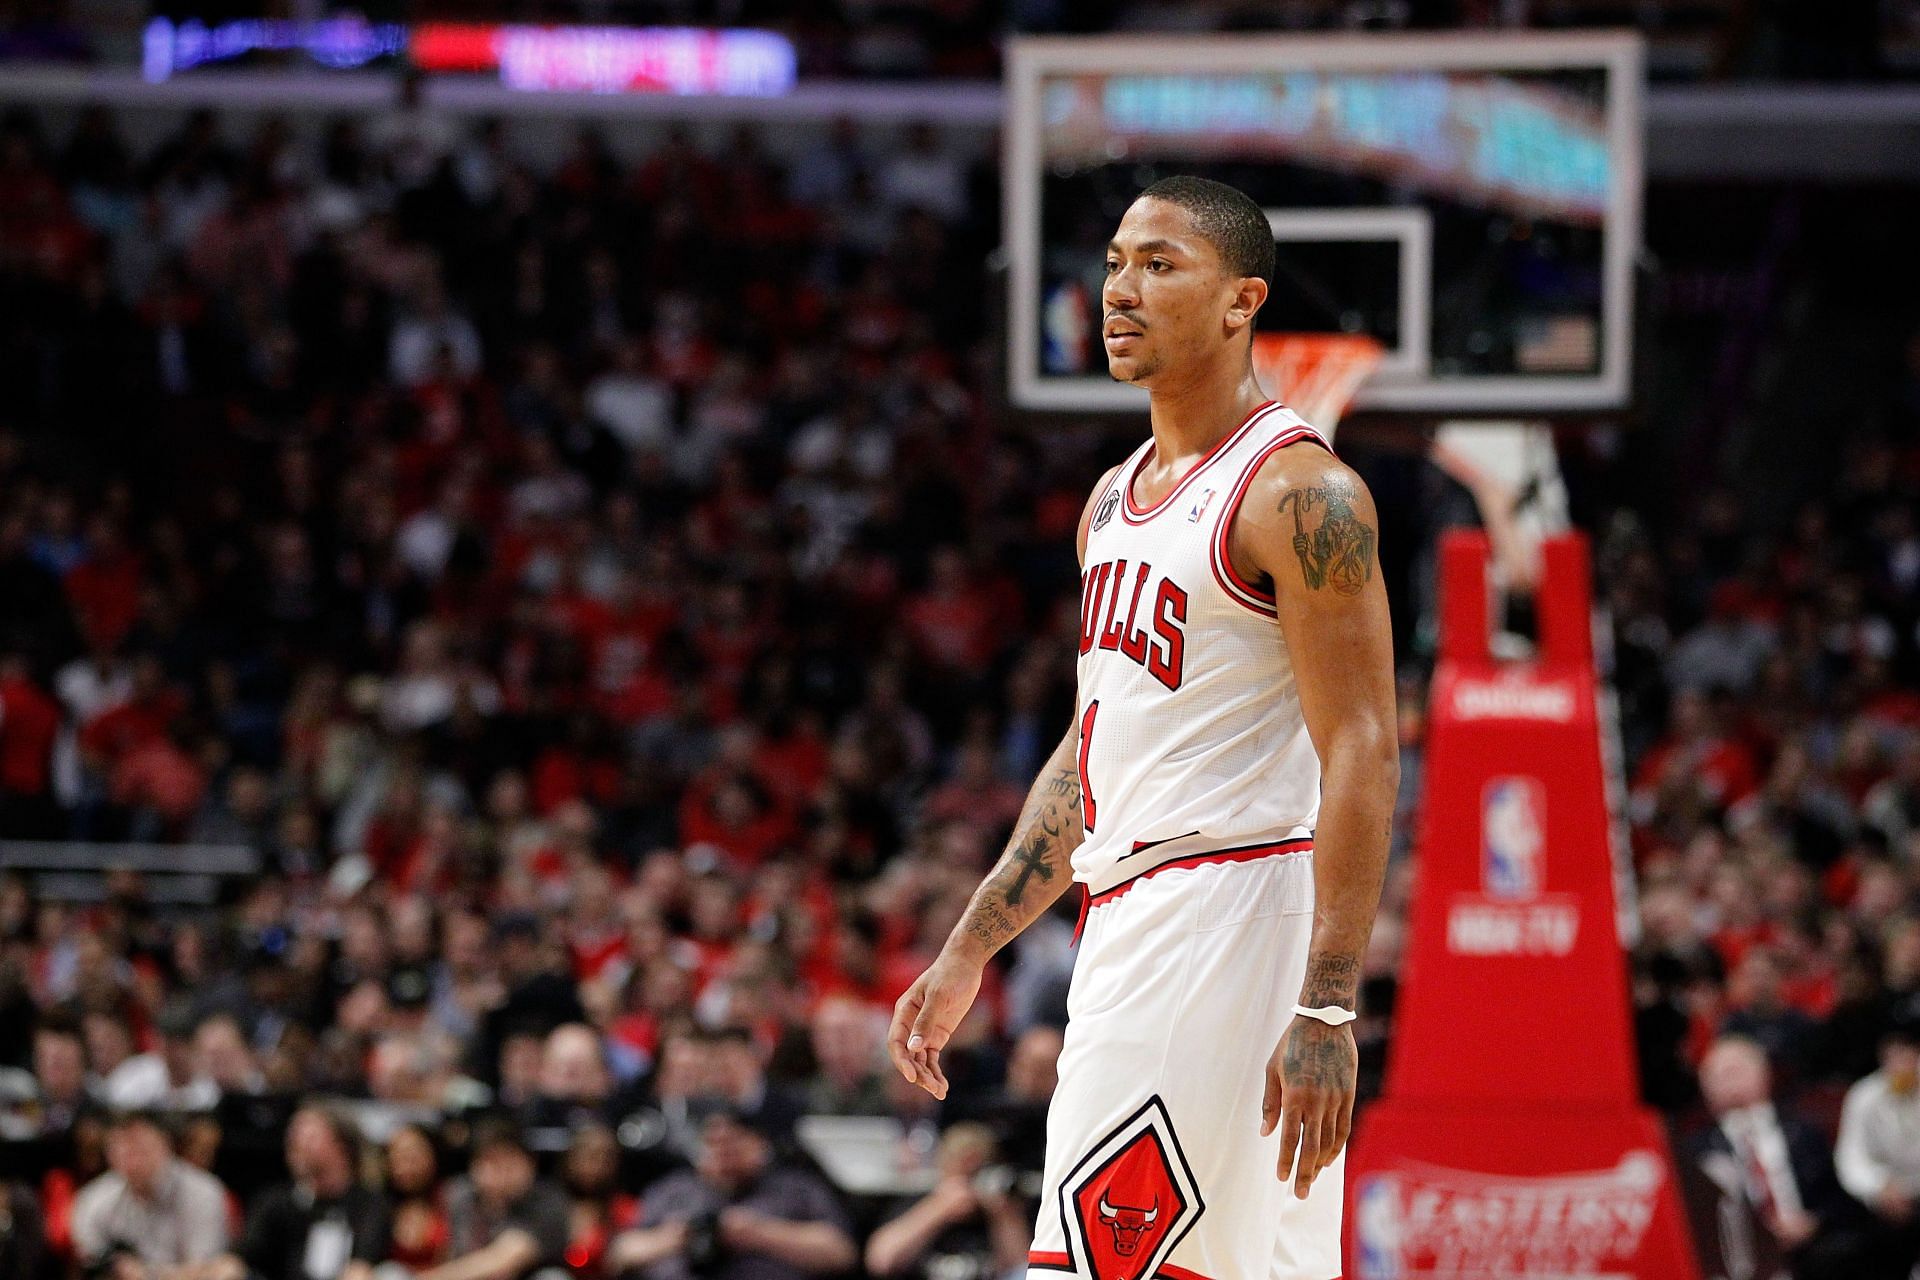 Derrick Rose doesn't deserve this 